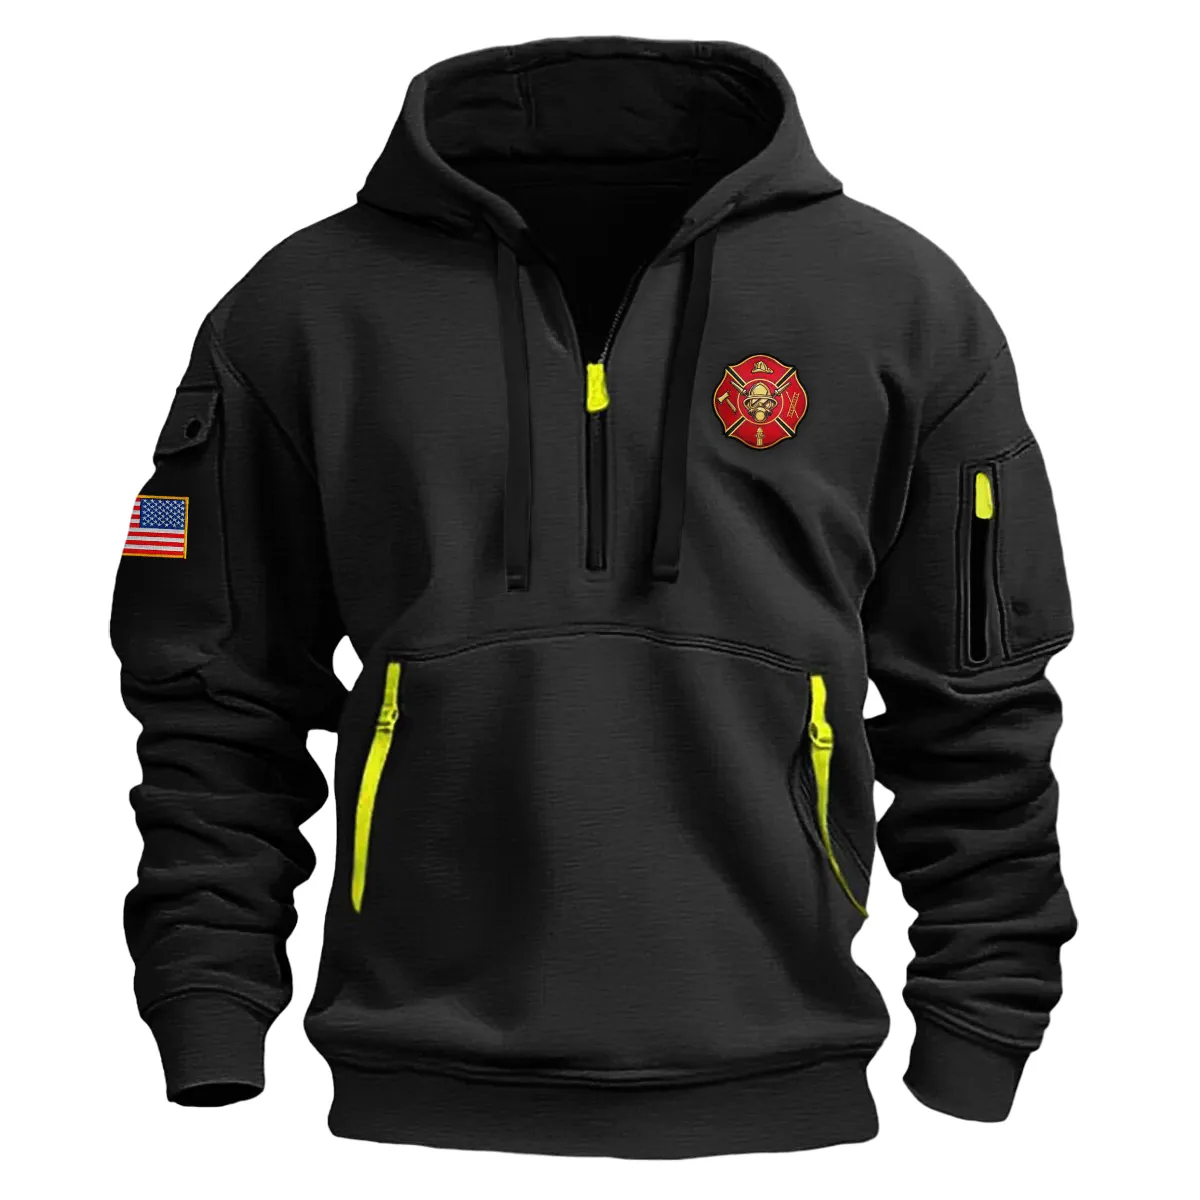 US Military All Branches U.S. FireFighter Fashion Hoodie Half Zipper